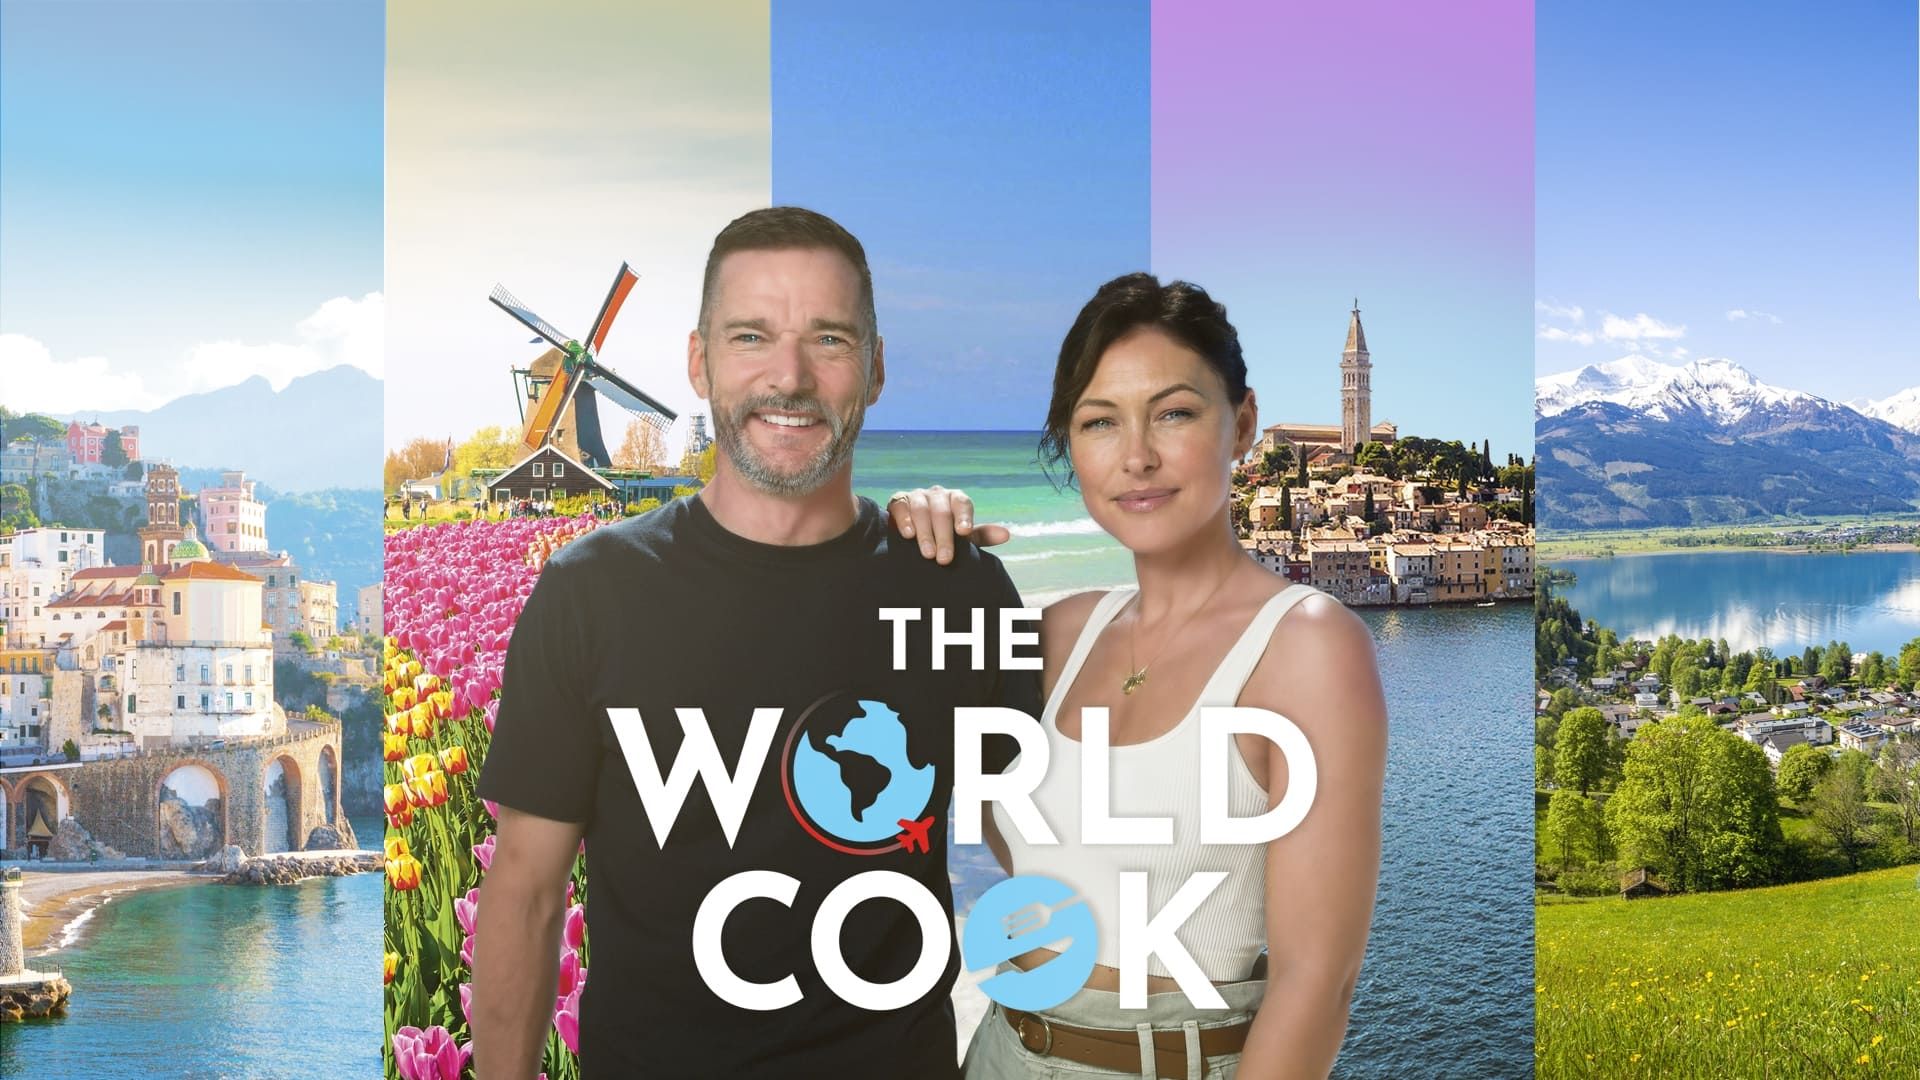 The World Cook background